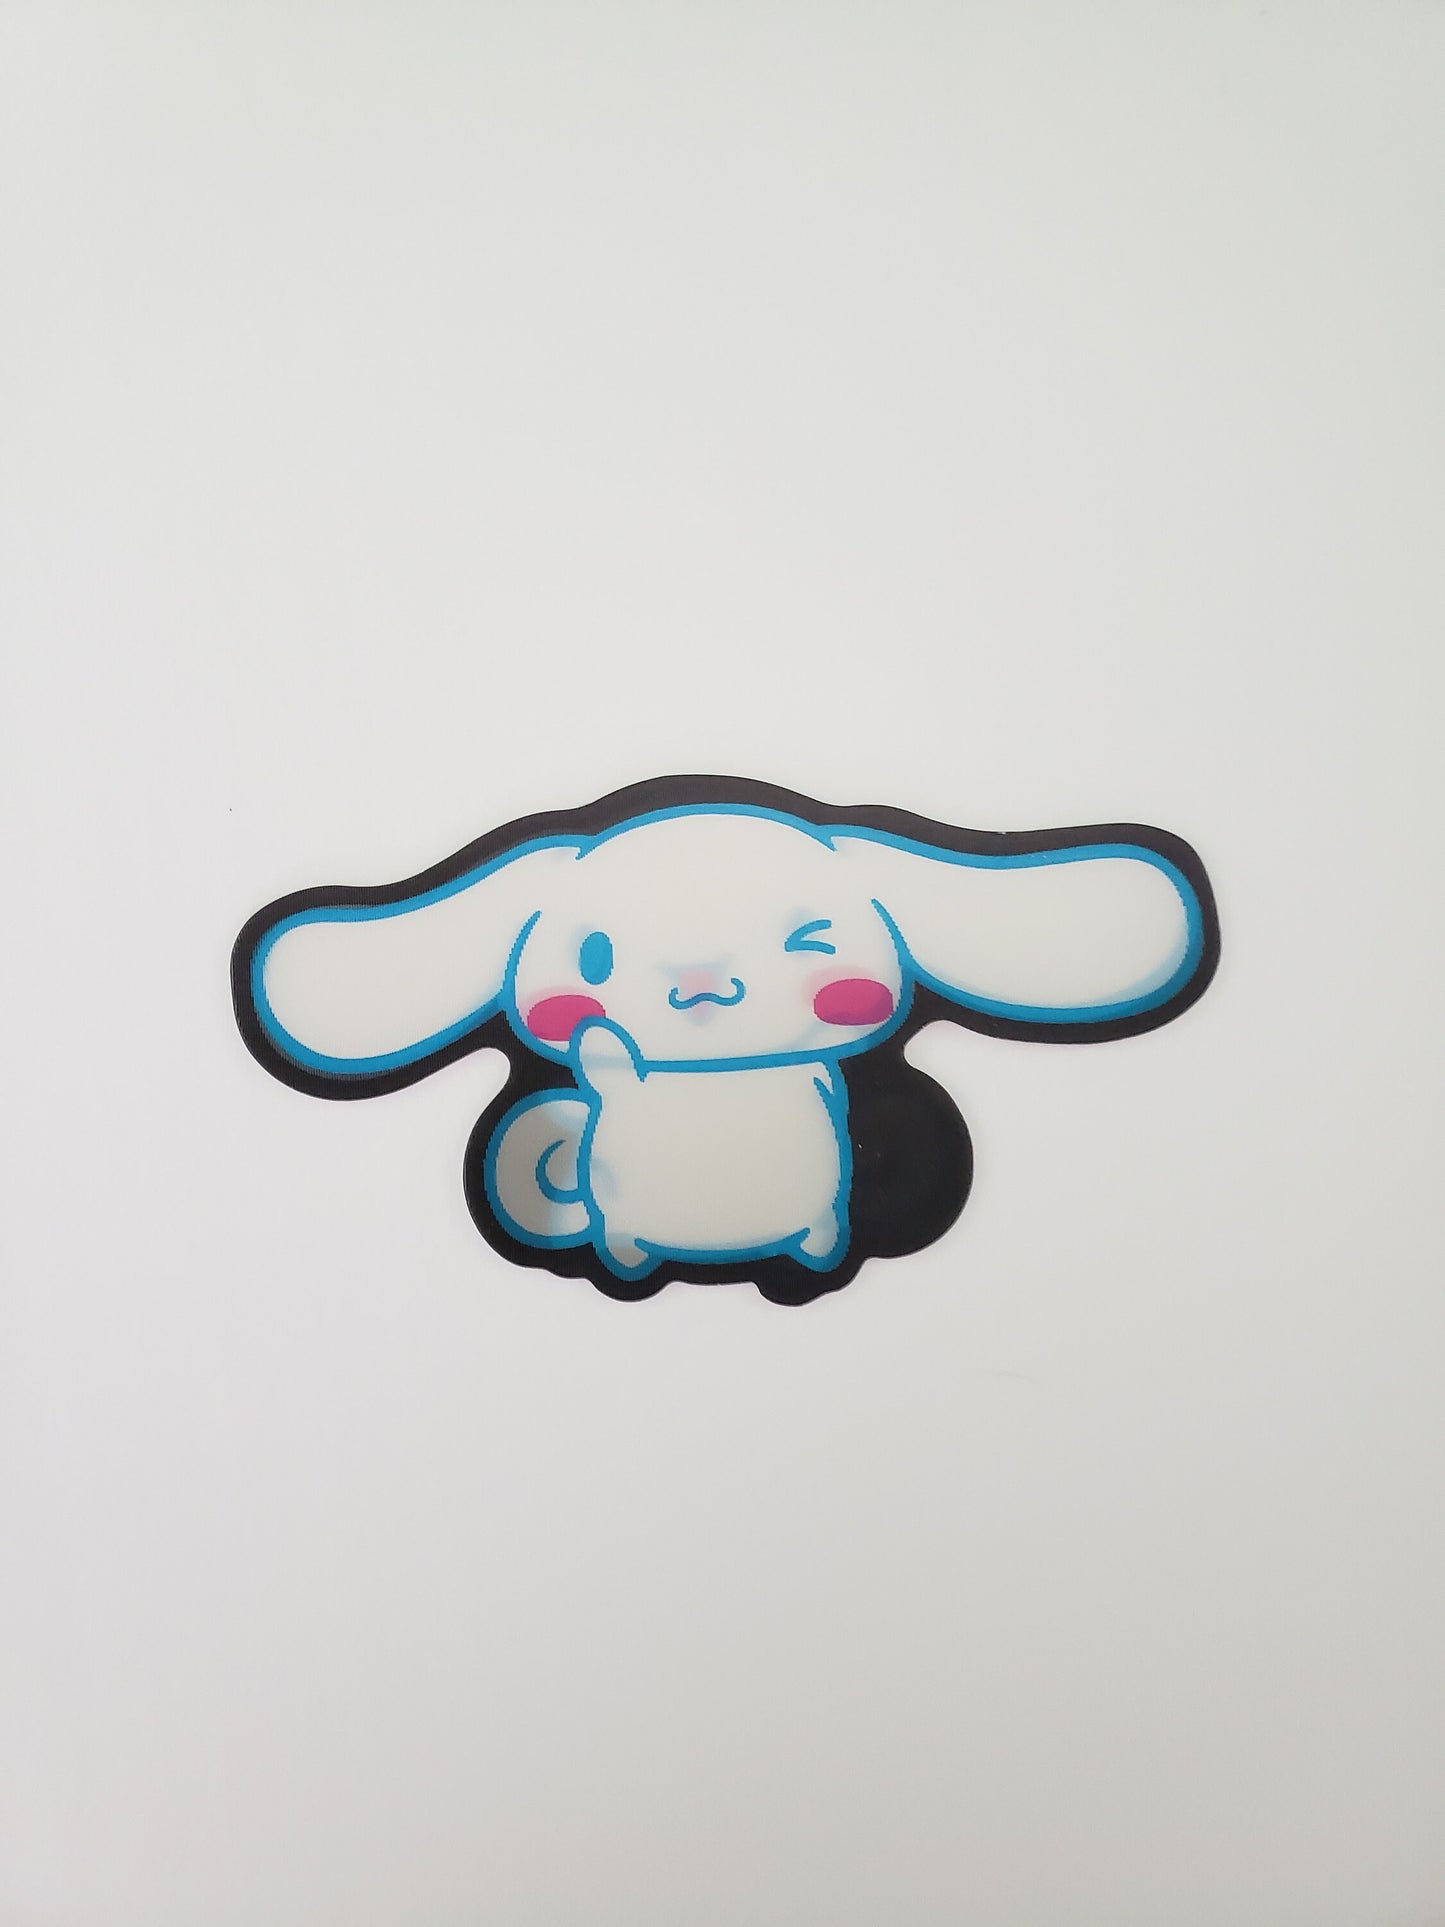 Adorable Animated Pup Peeker Sticker 2, 3D lenticular Car Sticker, Anime Sticker, Kawaii Sticker